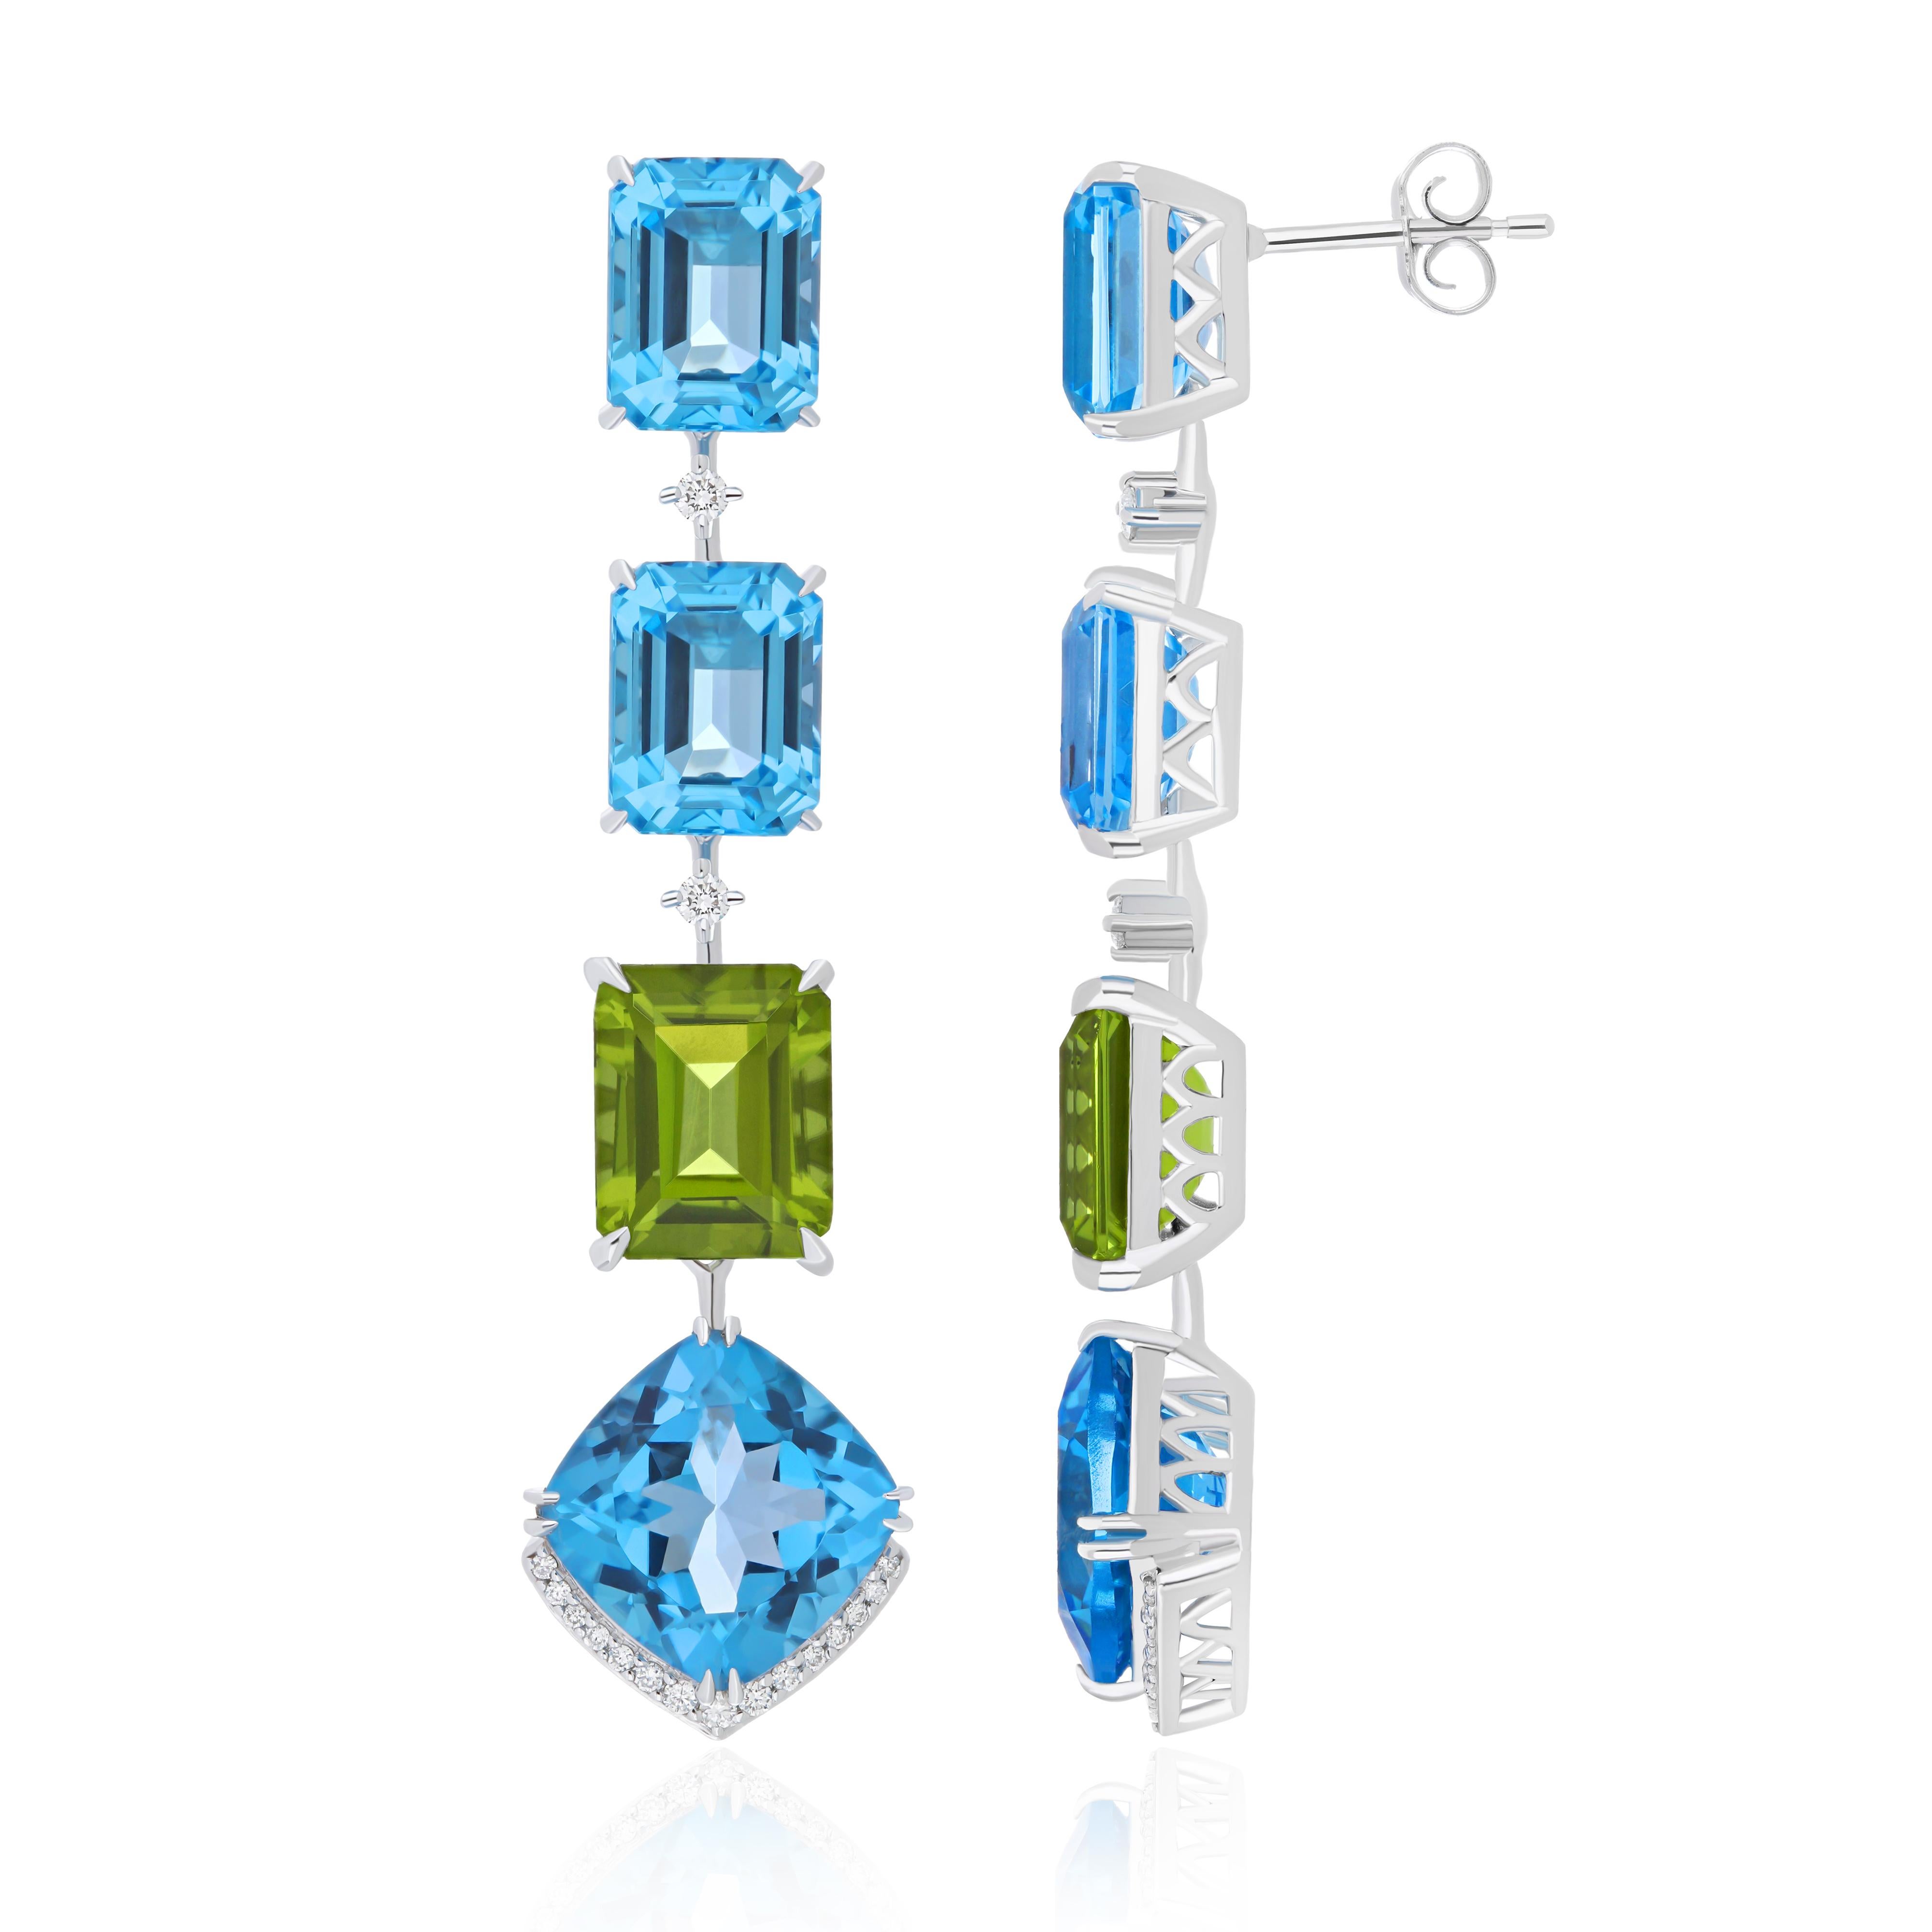 Elegant and Exquisitely Detailed 14 Karat White Gold Earrings set with Octagon Shape Swiss Blue Topaz with approx. 22.30 Cts (approx Total) and contrasting octagon  Peridot approx. 7.70Cts in Octagon Shape, accented with 0.21 cts  Diamond.